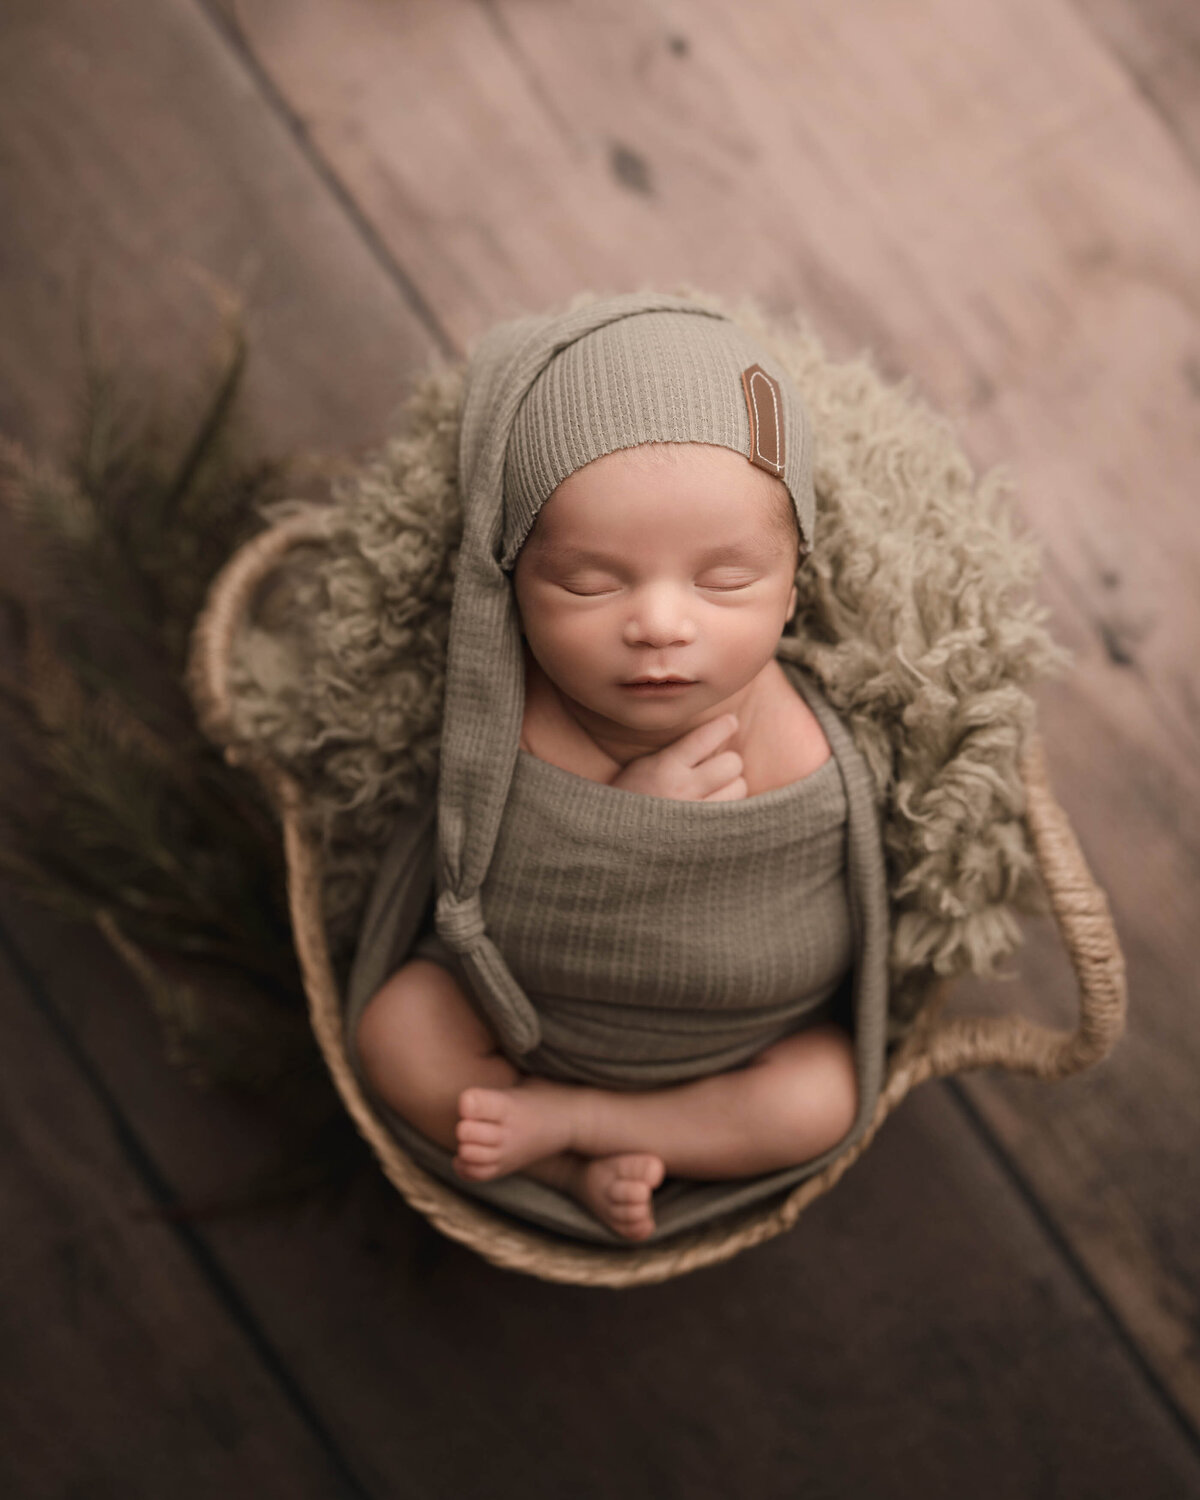 Aerial image of newborn photoshoot. Baby boy wrapped in taupe has his legs folded atop of him as he is posed in a basket. His fingers are peeking out of the wrap and he is wearing a long cap. Baby boy is sleeping peacefully. Captured by best Murrieta newborn photographer Bonny Lynn Photography.